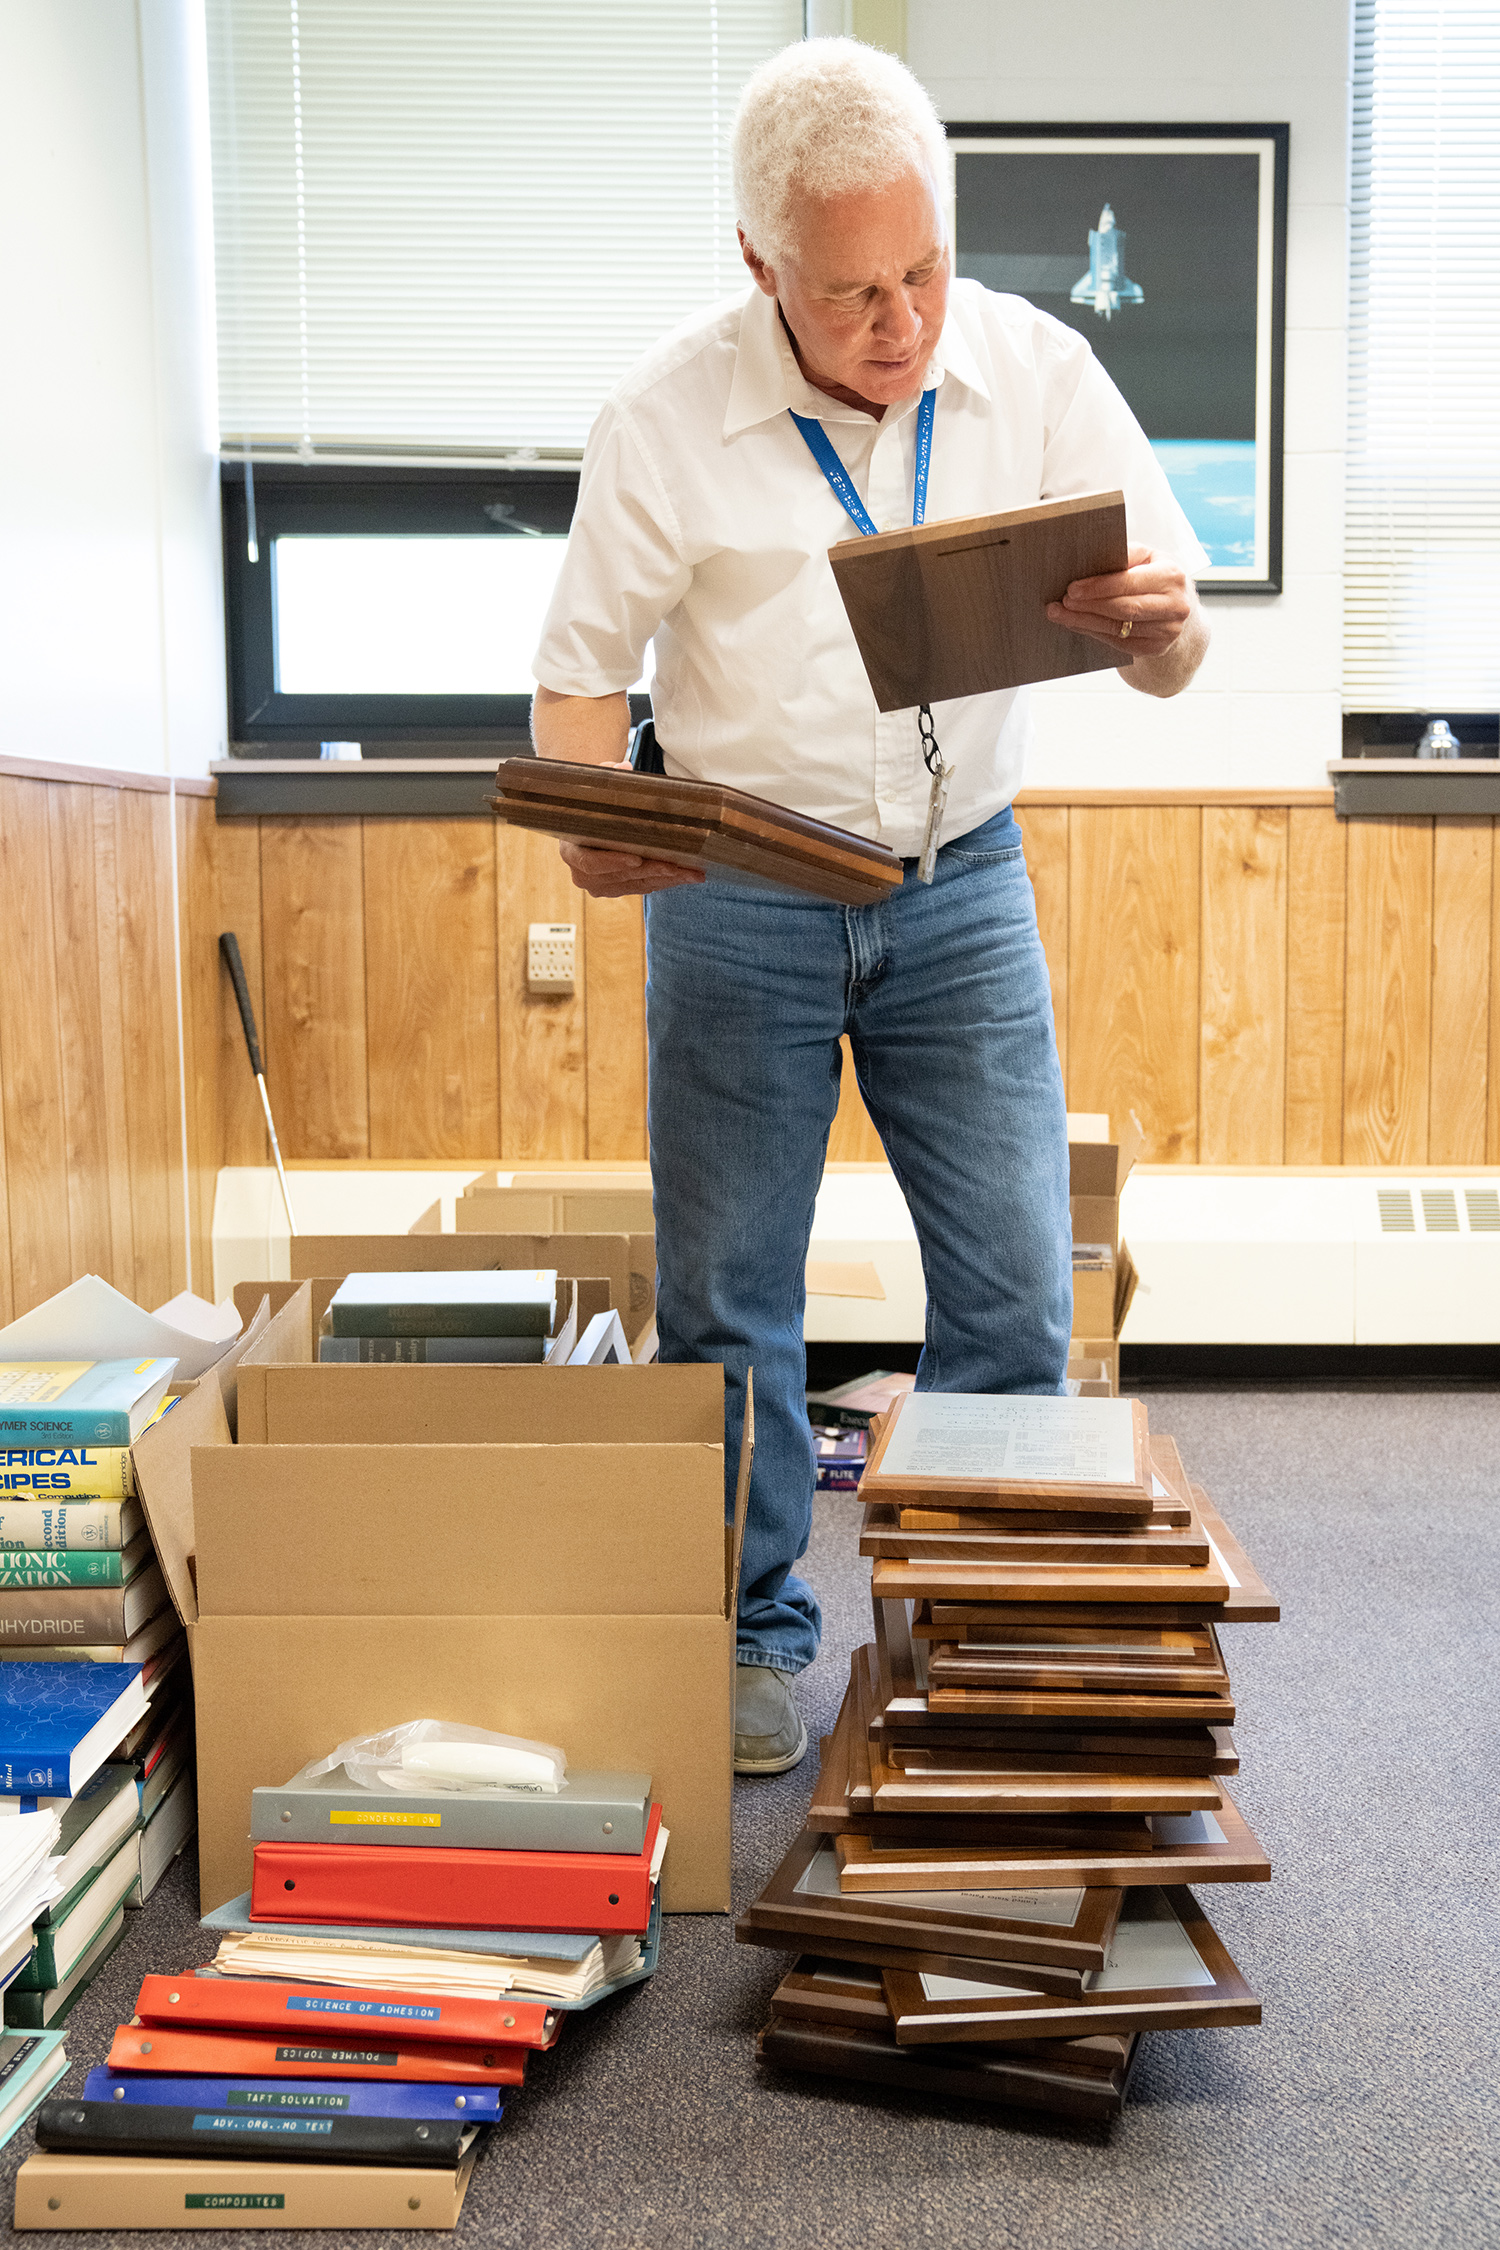 Dr. Robert Bryant smiling and in a white button up shirt and blue jeans with a blue lanyard around his neck looking at his plaques while surrounded by more plaques, binders, science books, and boxes in a wood-paneled office with dark multi-color carpet